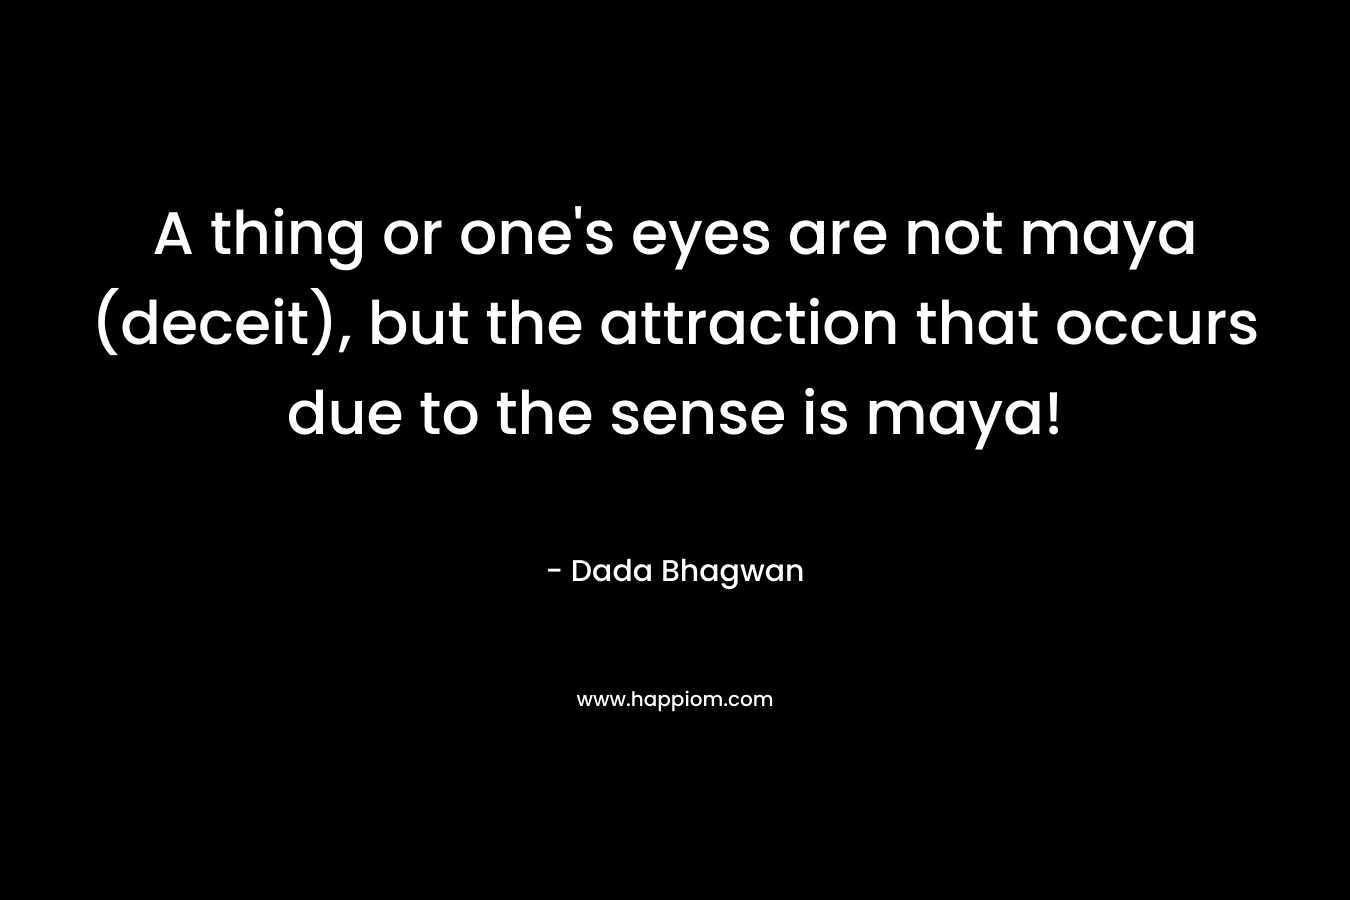 A thing or one’s eyes are not maya (deceit), but the attraction that occurs due to the sense is maya! – Dada Bhagwan